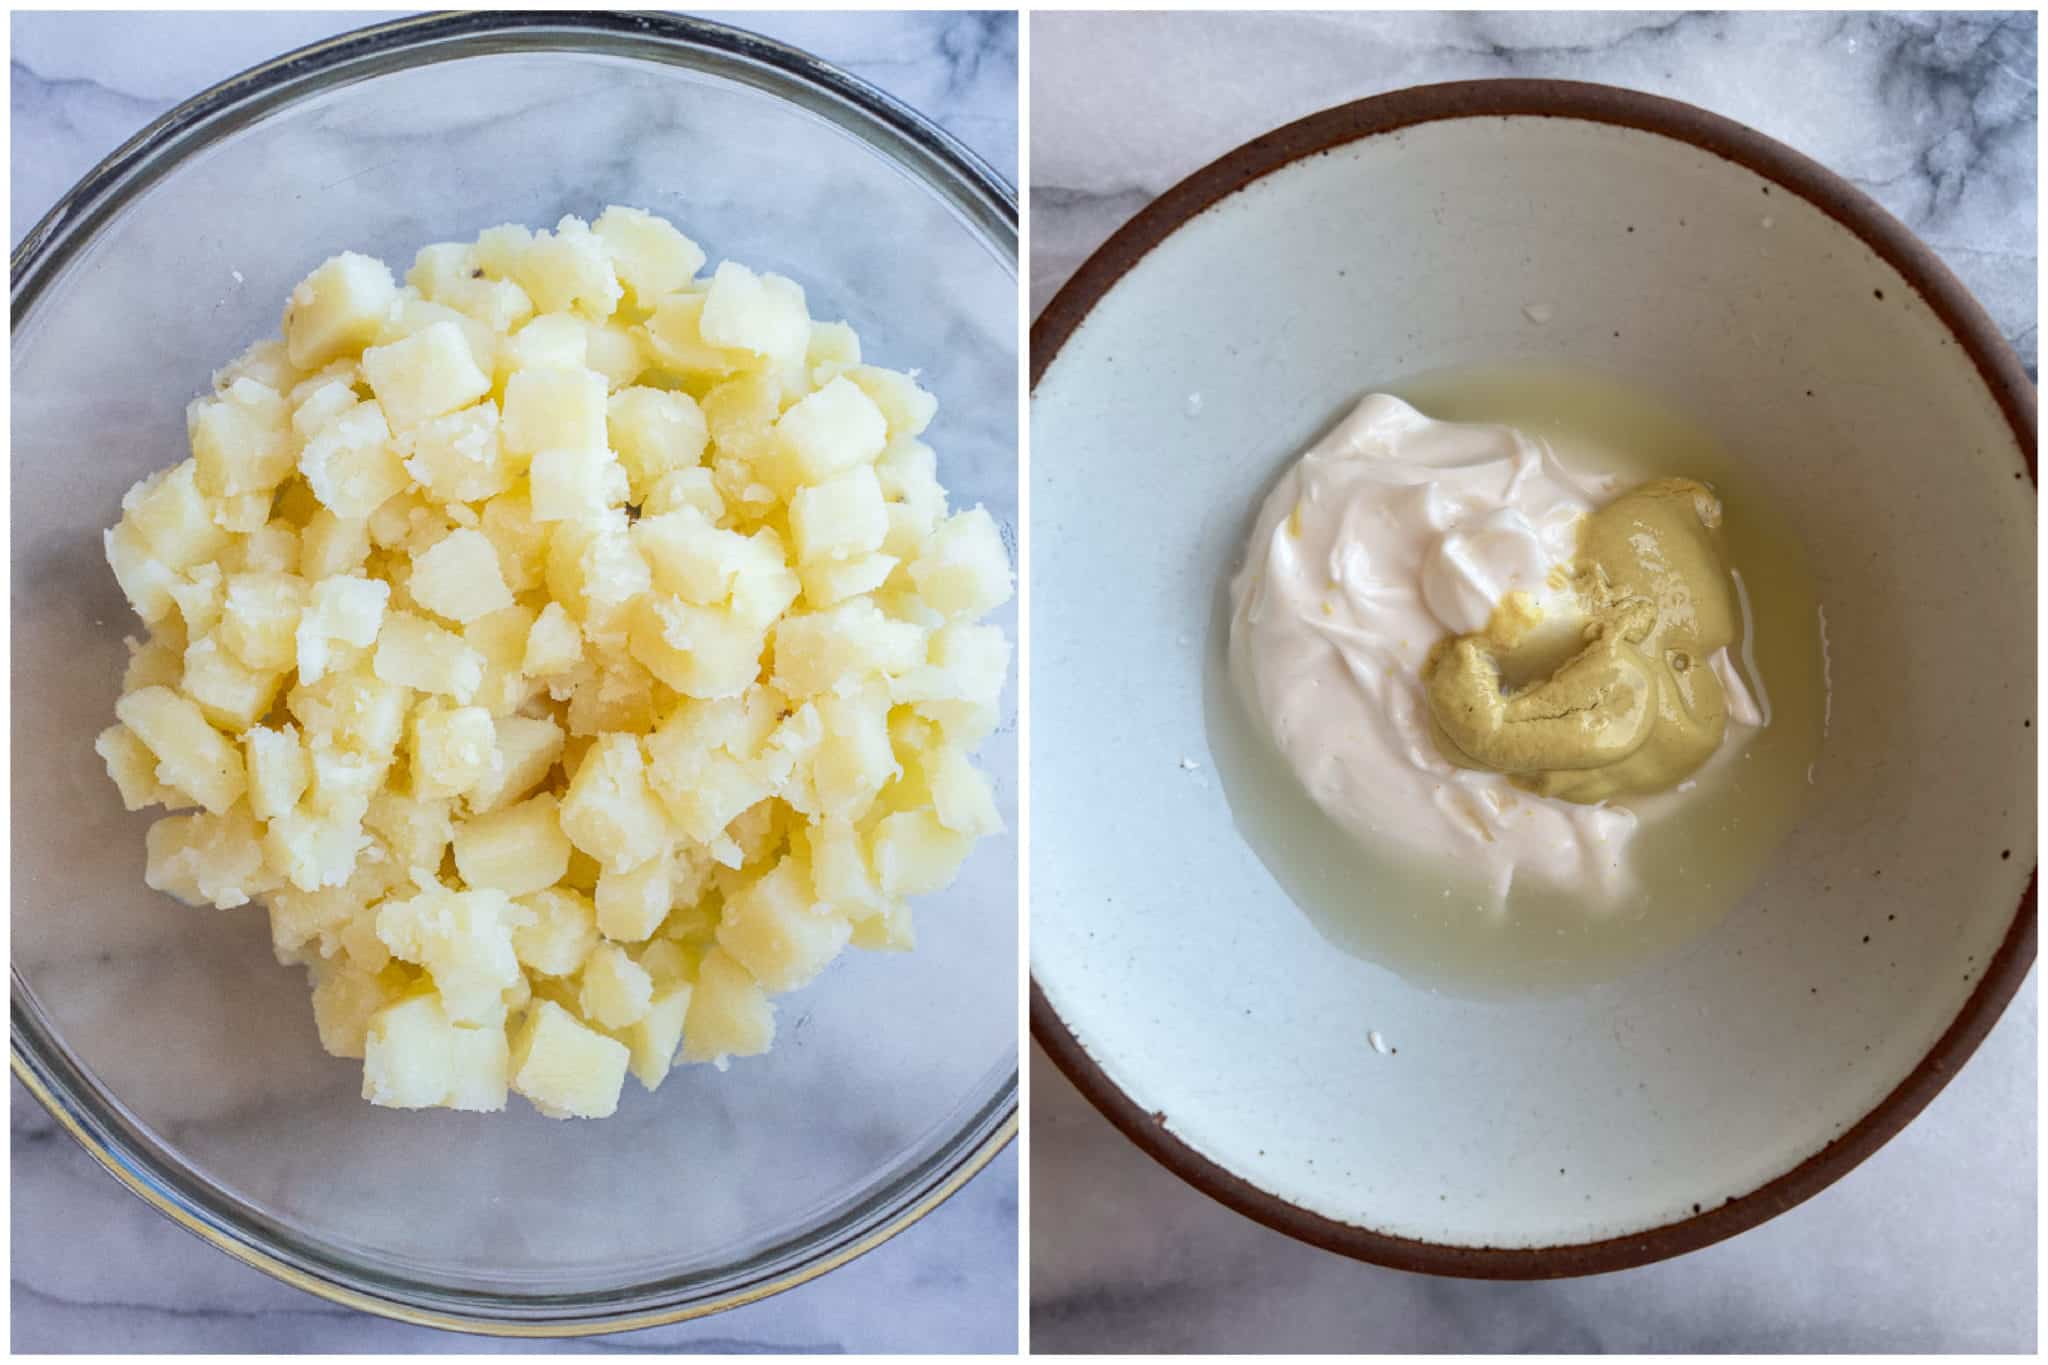 Shows how to cook potatoes for the potato salad and vinegar dressing